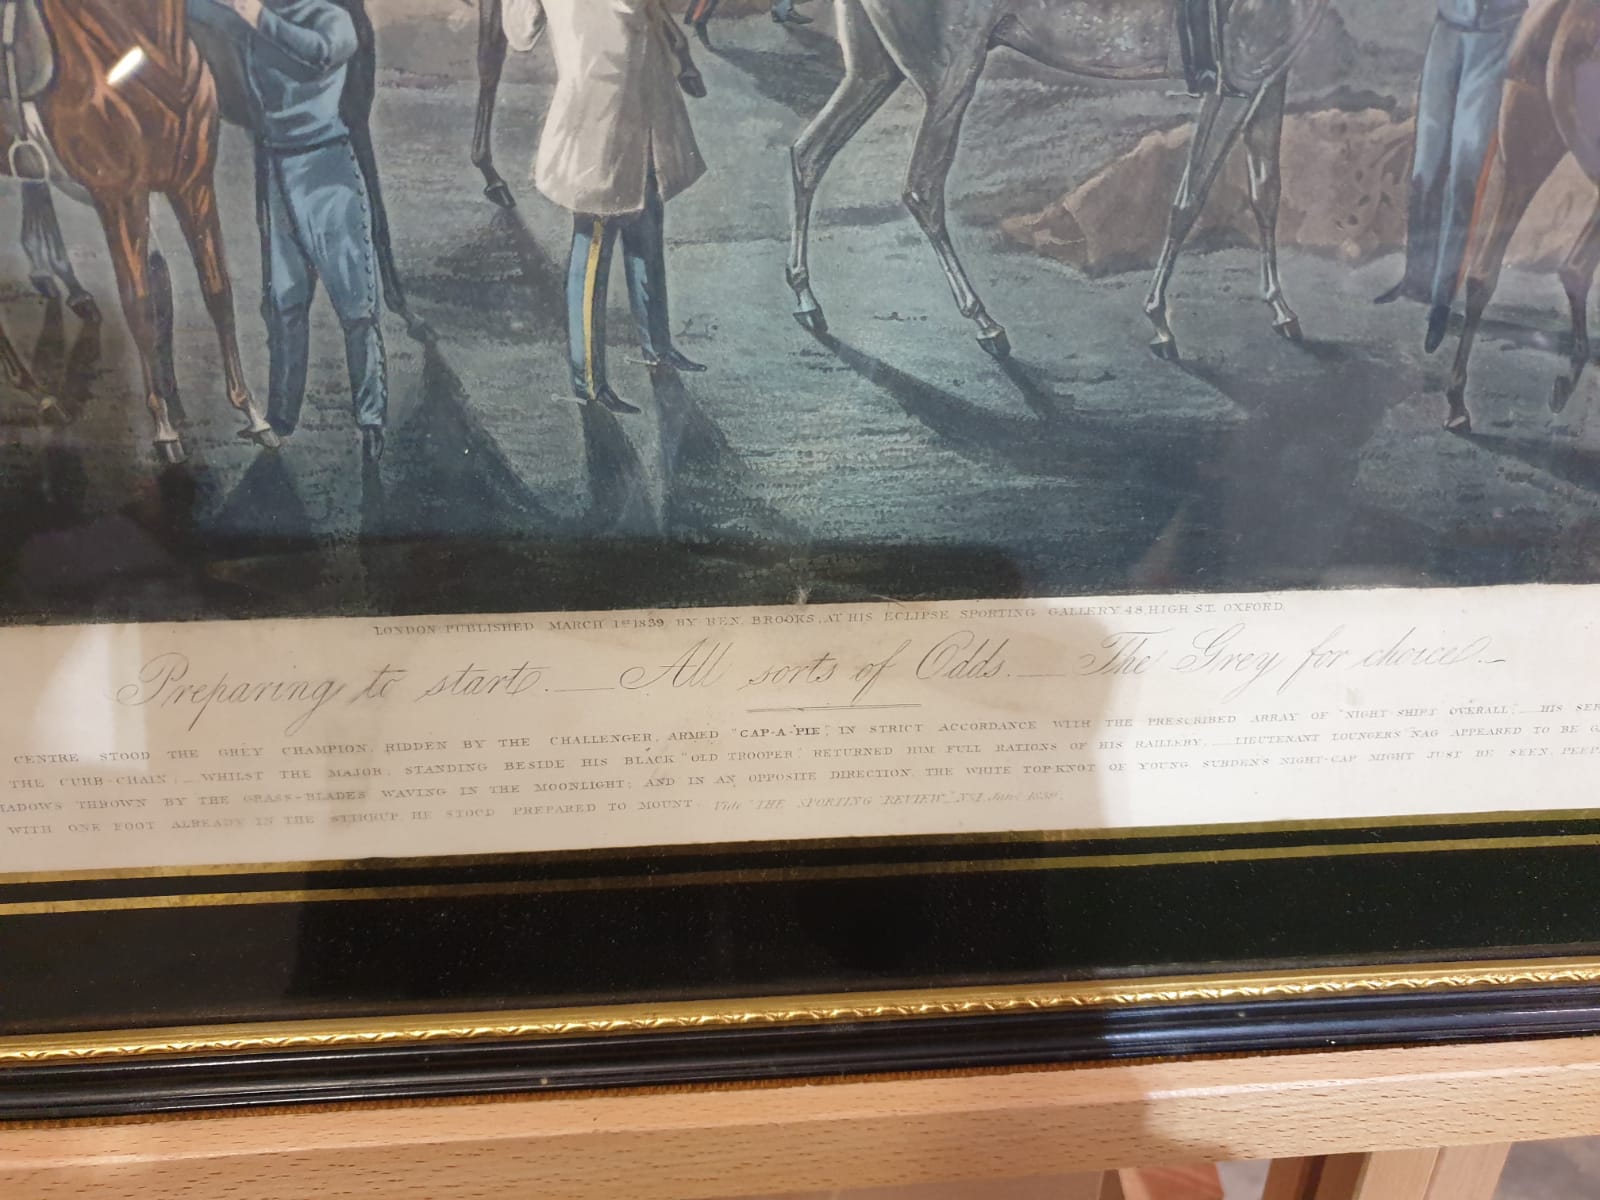 Framed vintage print .The First Steeplechase on Record - Ipswich, the watering place behind the - Image 5 of 6